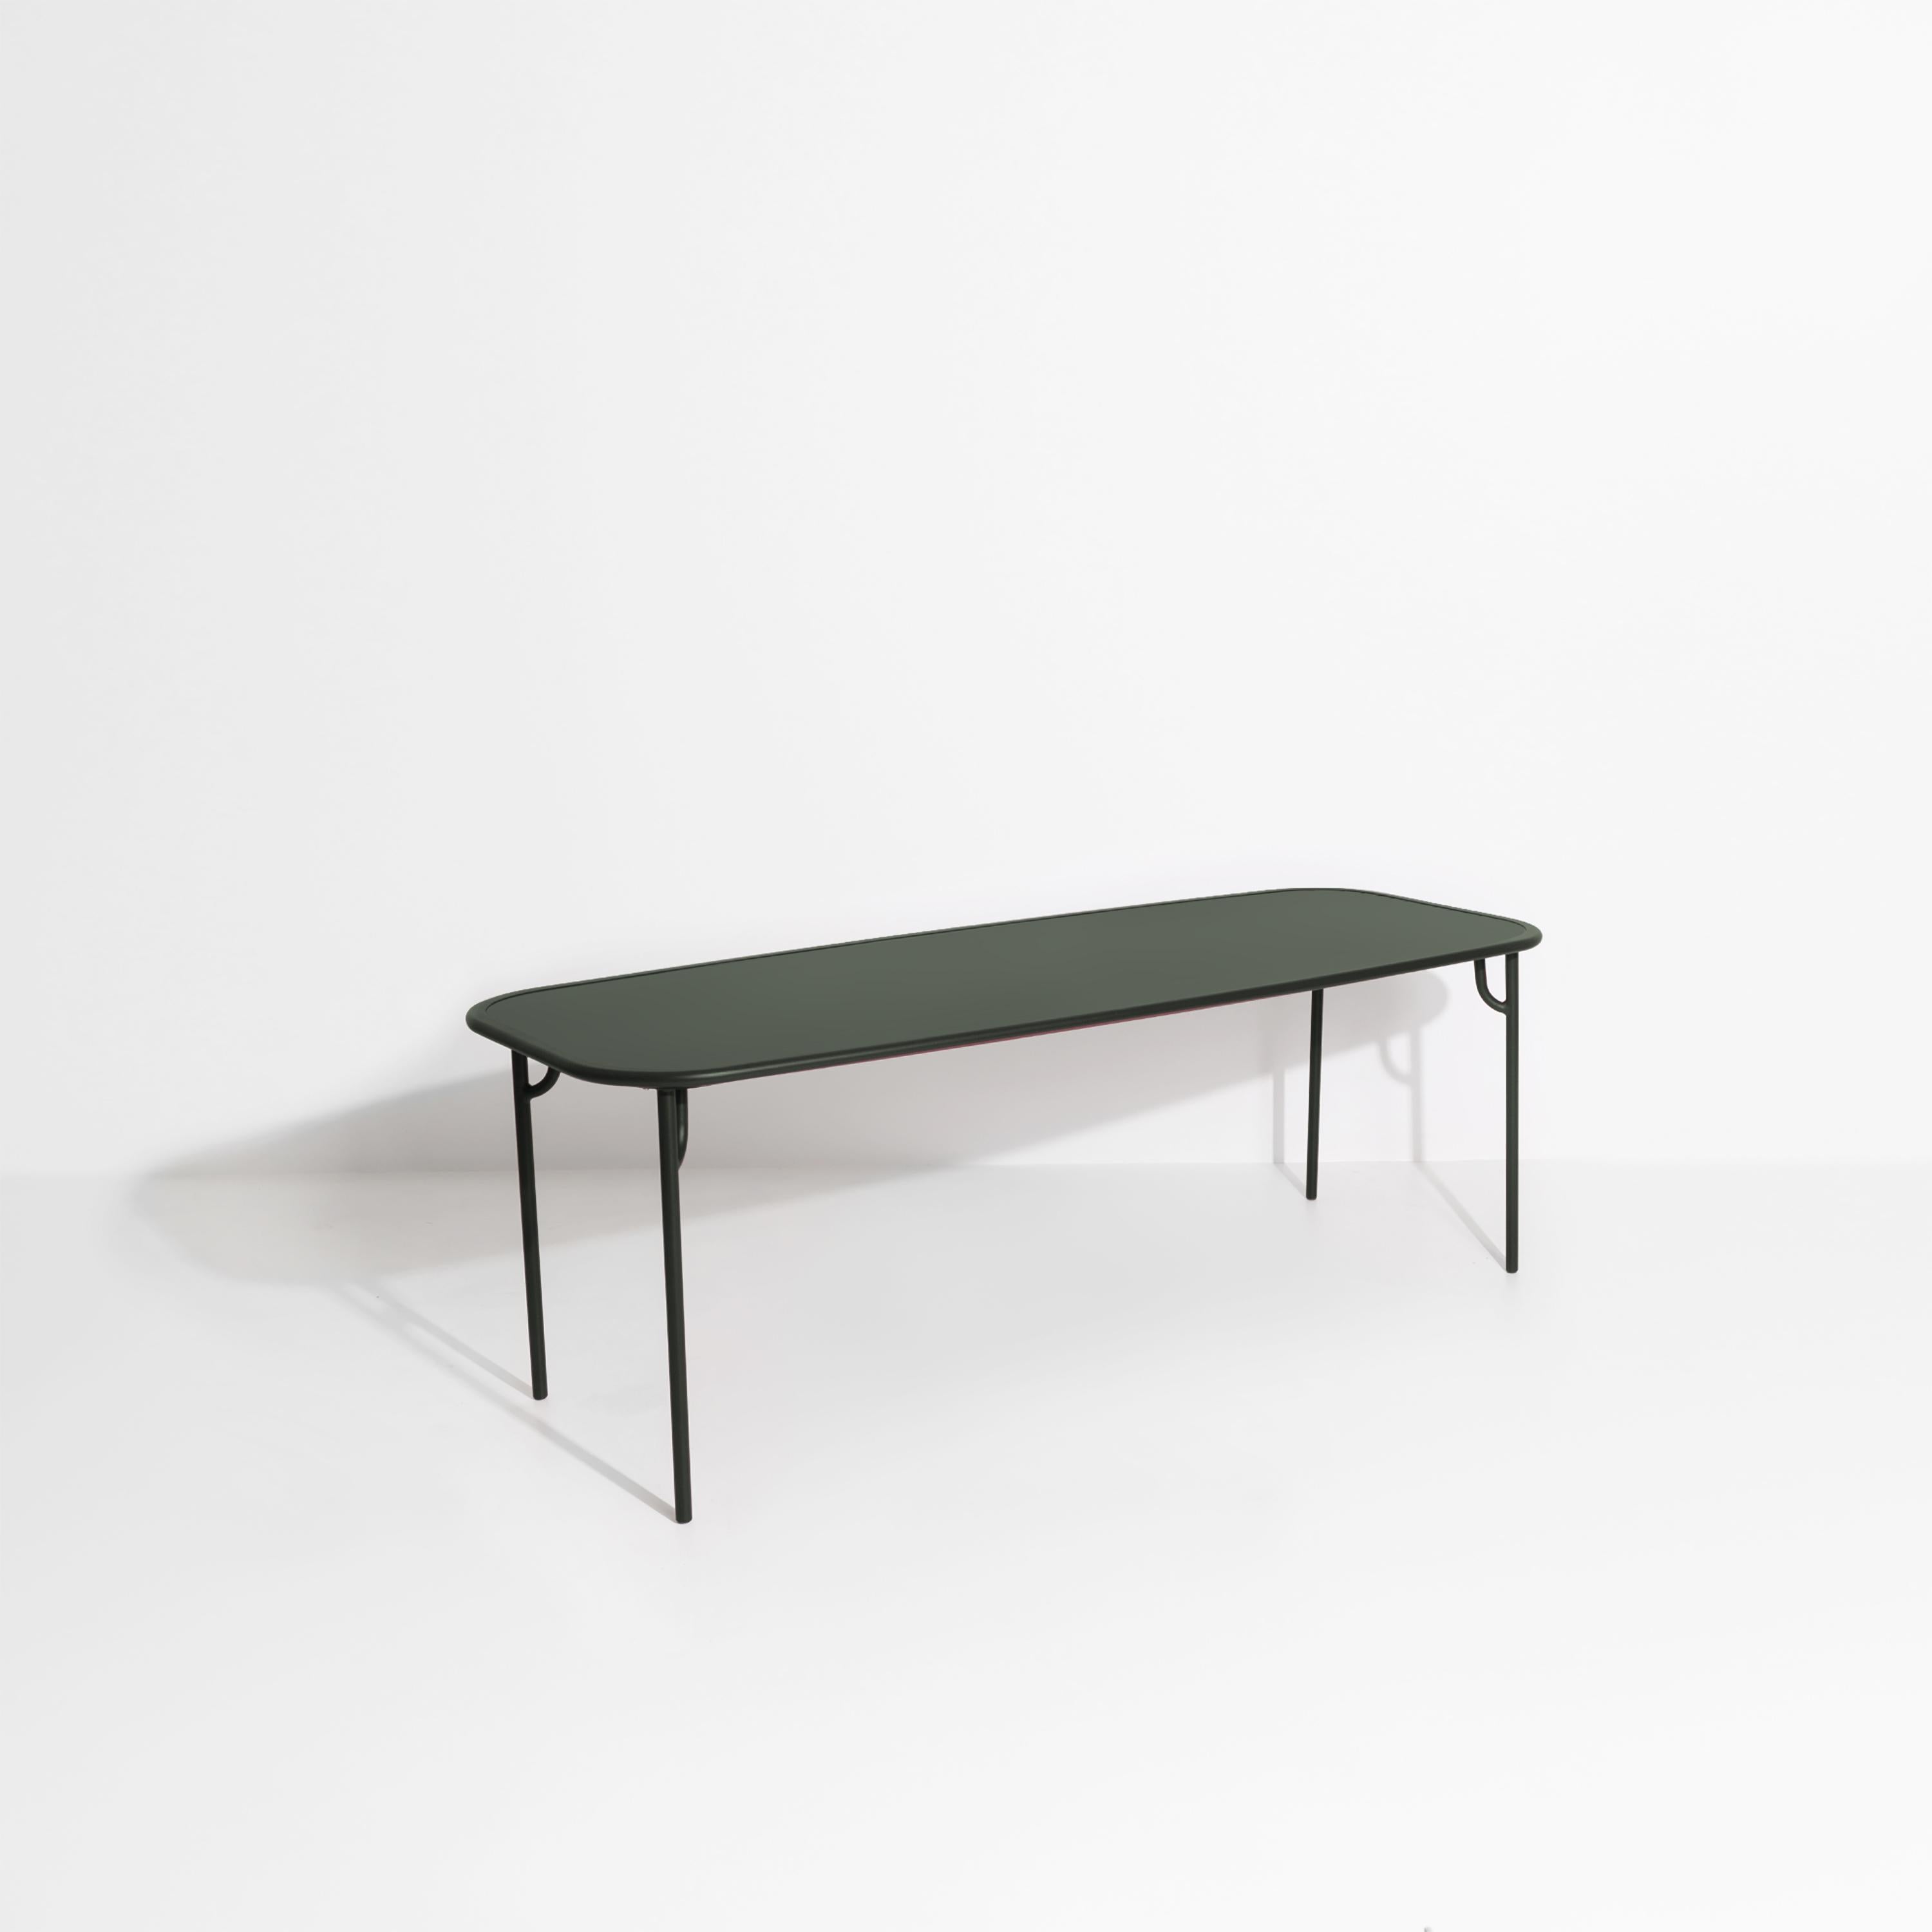 Petite Friture Week-End Large Plain Rectangular Dining Table in Glass Green Aluminium by Studio BrichetZiegler, 2017

The week-end collection is a full range of outdoor furniture, in aluminium grained epoxy paint, matt finish, that includes 18